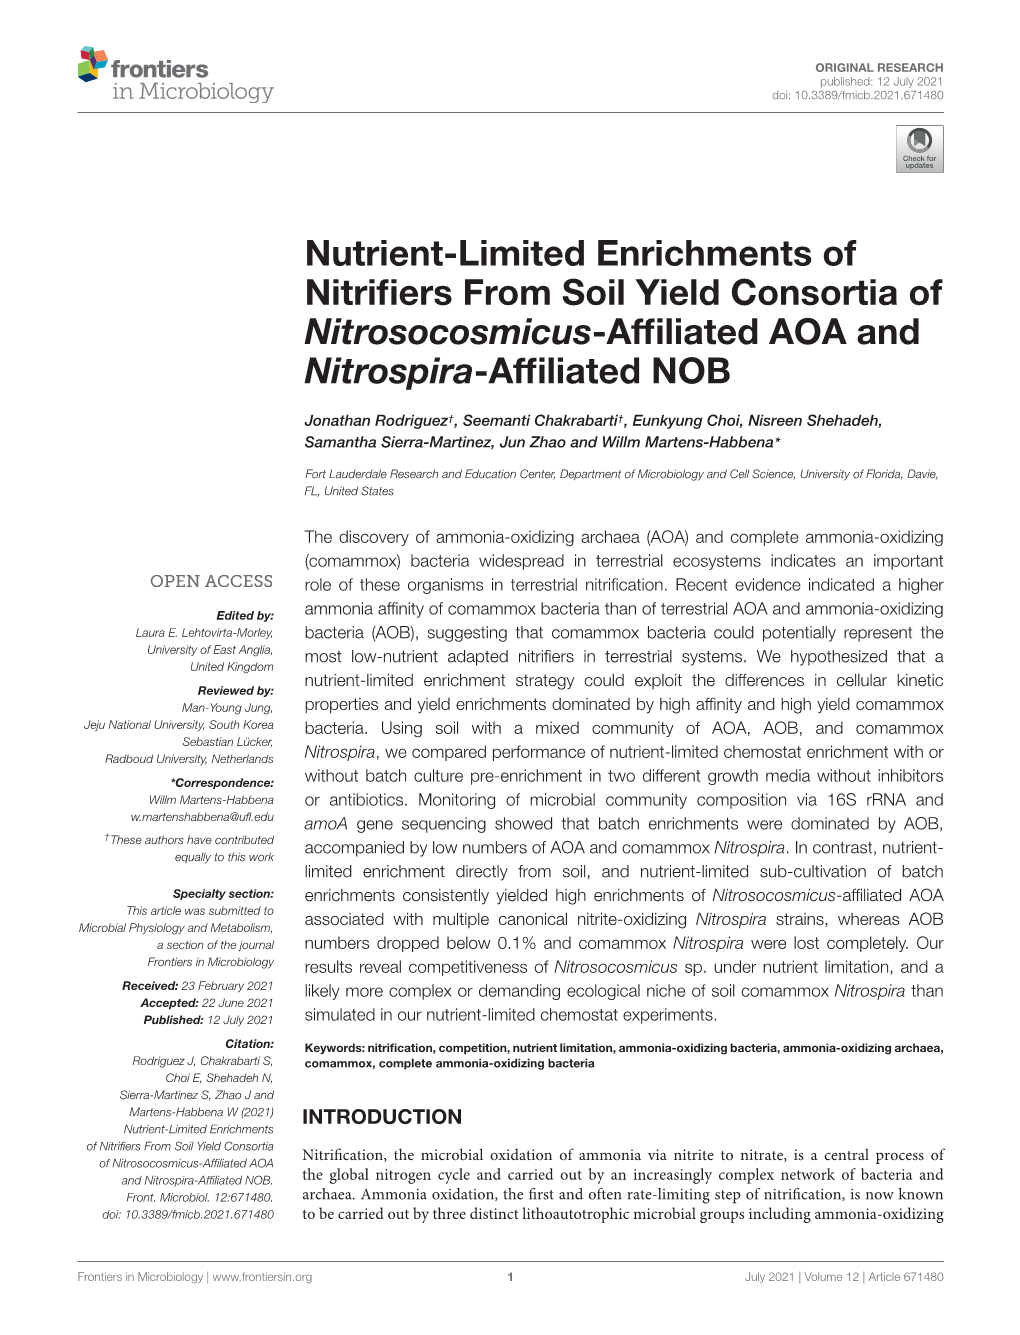 Nutrient-Limited Enrichments of Nitrifiers from Soil Yield Consortia of Nitrosocosmicus-Affiliated AOA and Nitrospira-Affiliated